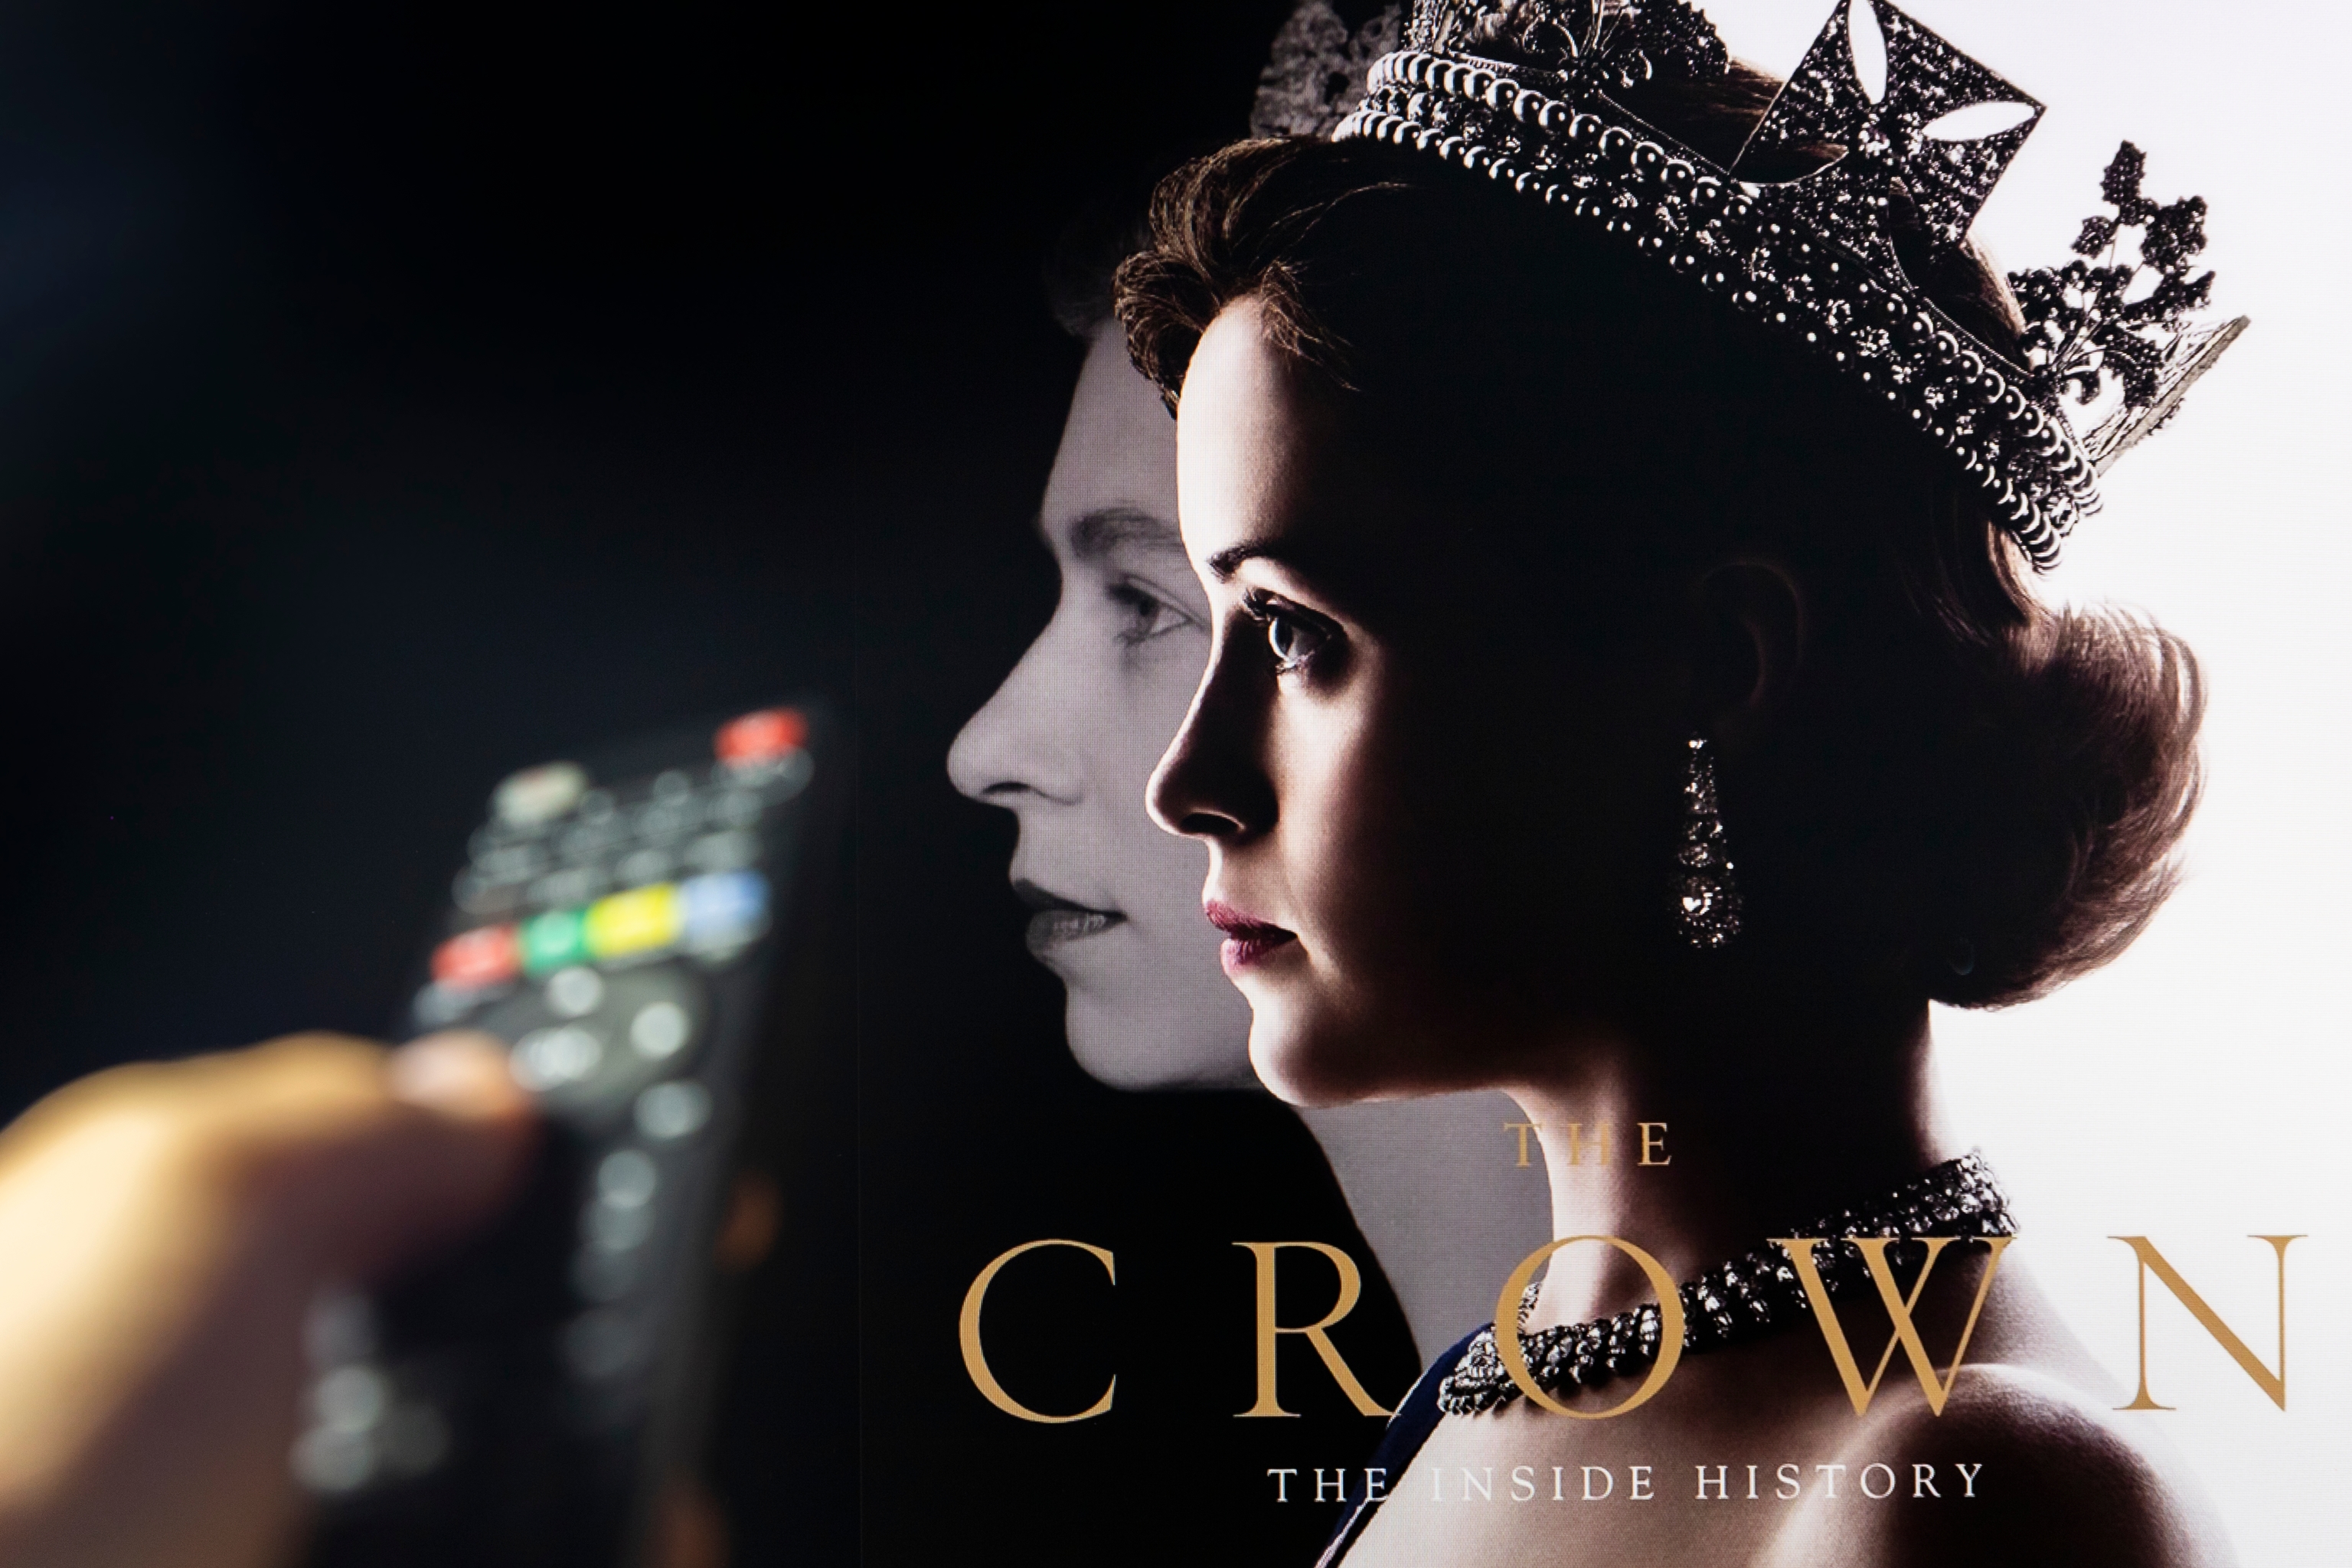 Watching TV Show The Crown on Netflix with remote control in hand. TV series is about British Royal family and Queen Elizabeth II.